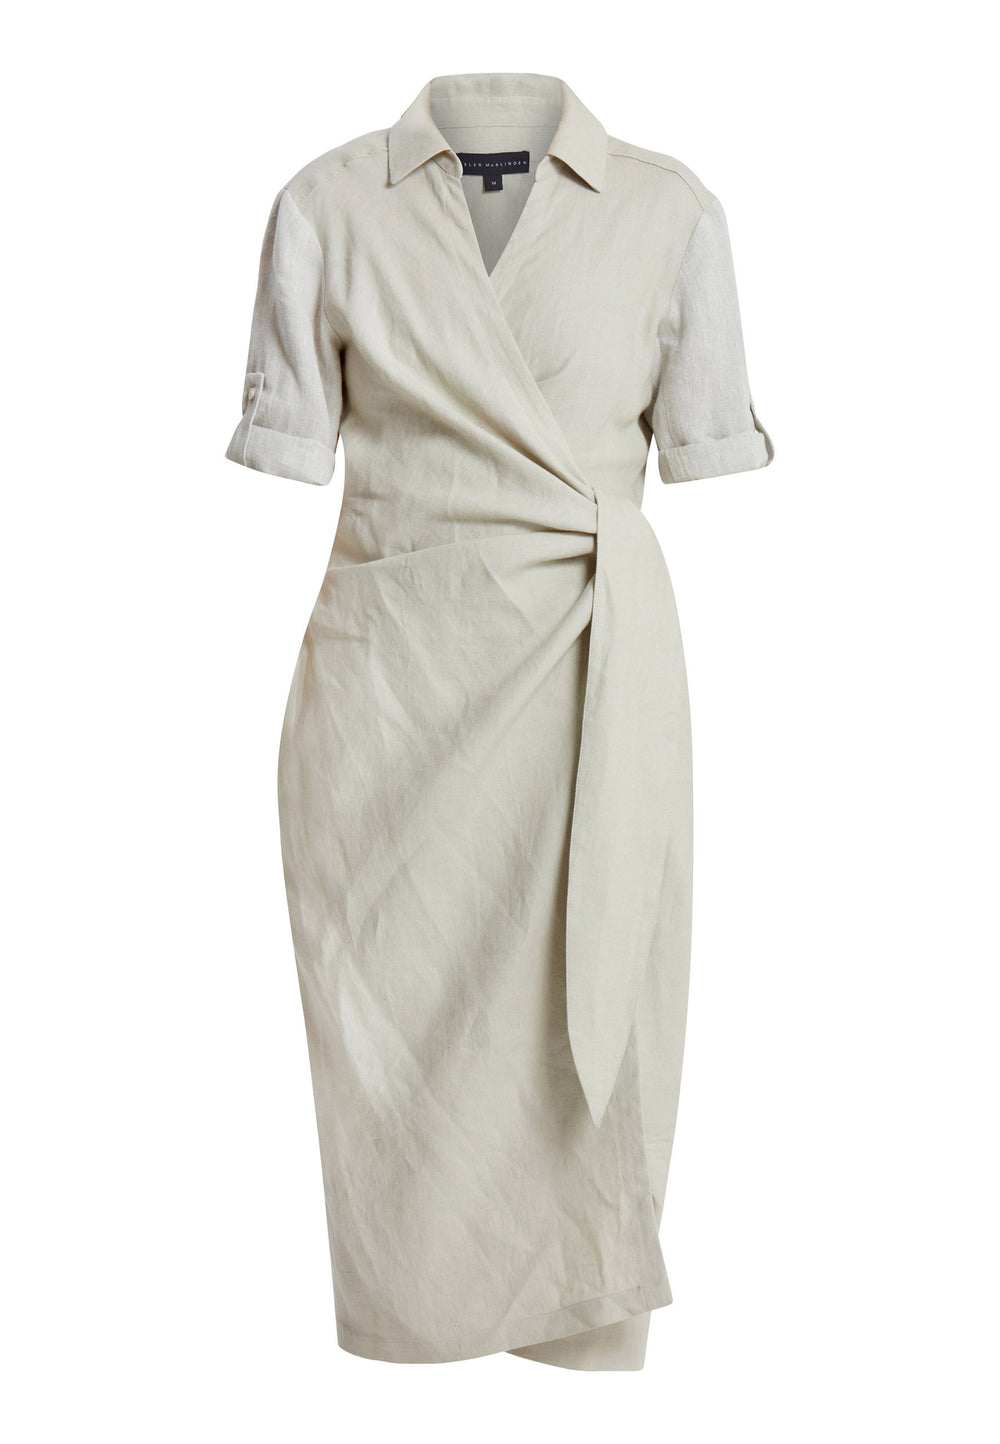 Leonne, the investment-worthy oatmeal linen wrap dress. Crafted in a sustainable Irish linen. An aunthetic wrap dress that ties to the side with a generous belt and flattering gathers at the waist. Engineered with a turned back elbow length sleeve. The ultimate summer staple.